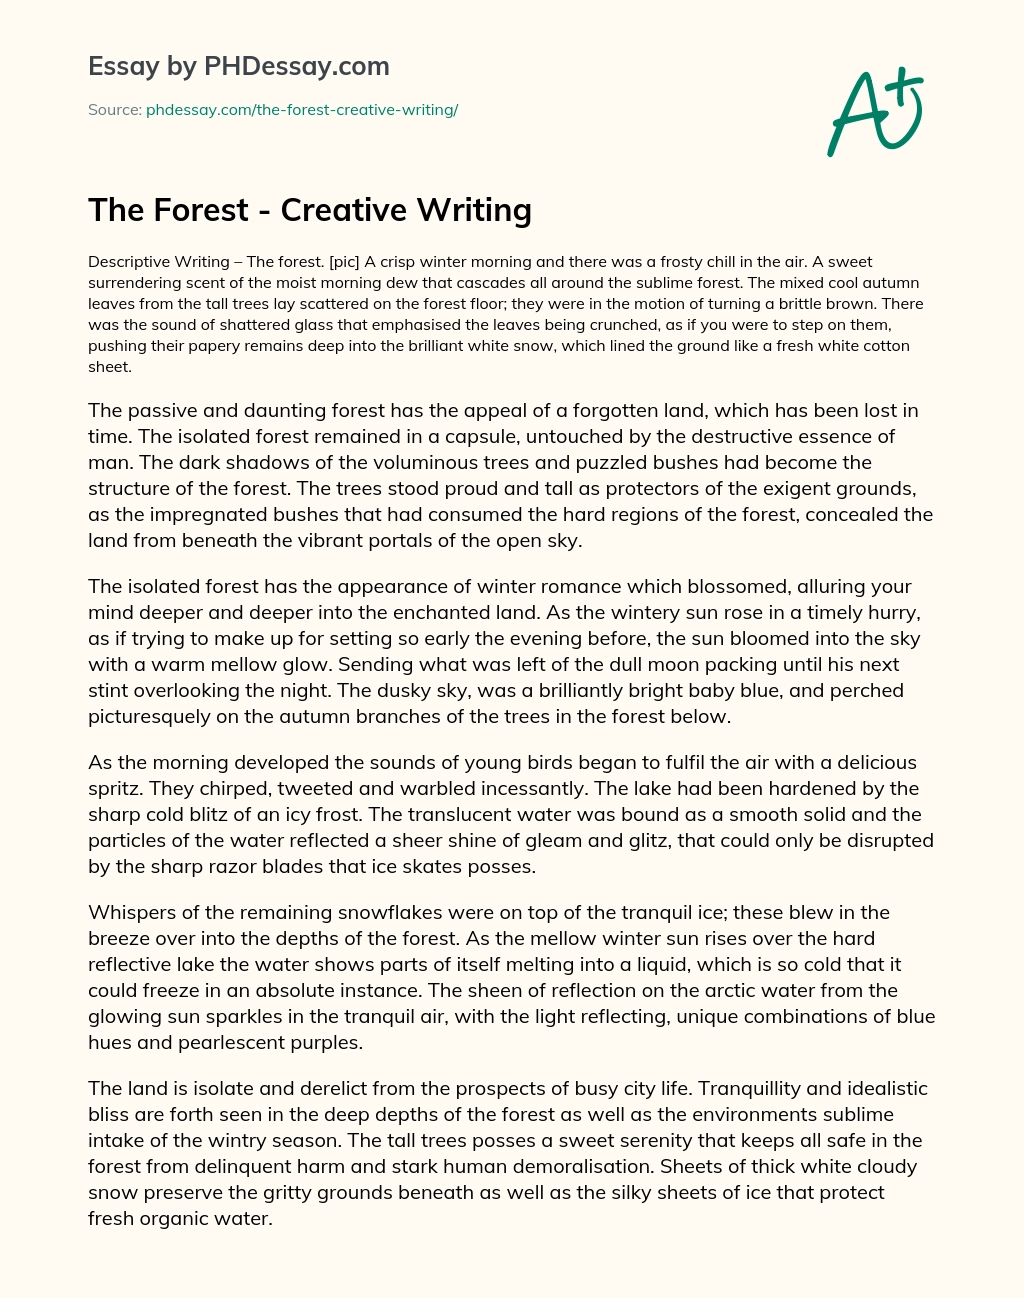 The Forest – Creative Writing essay